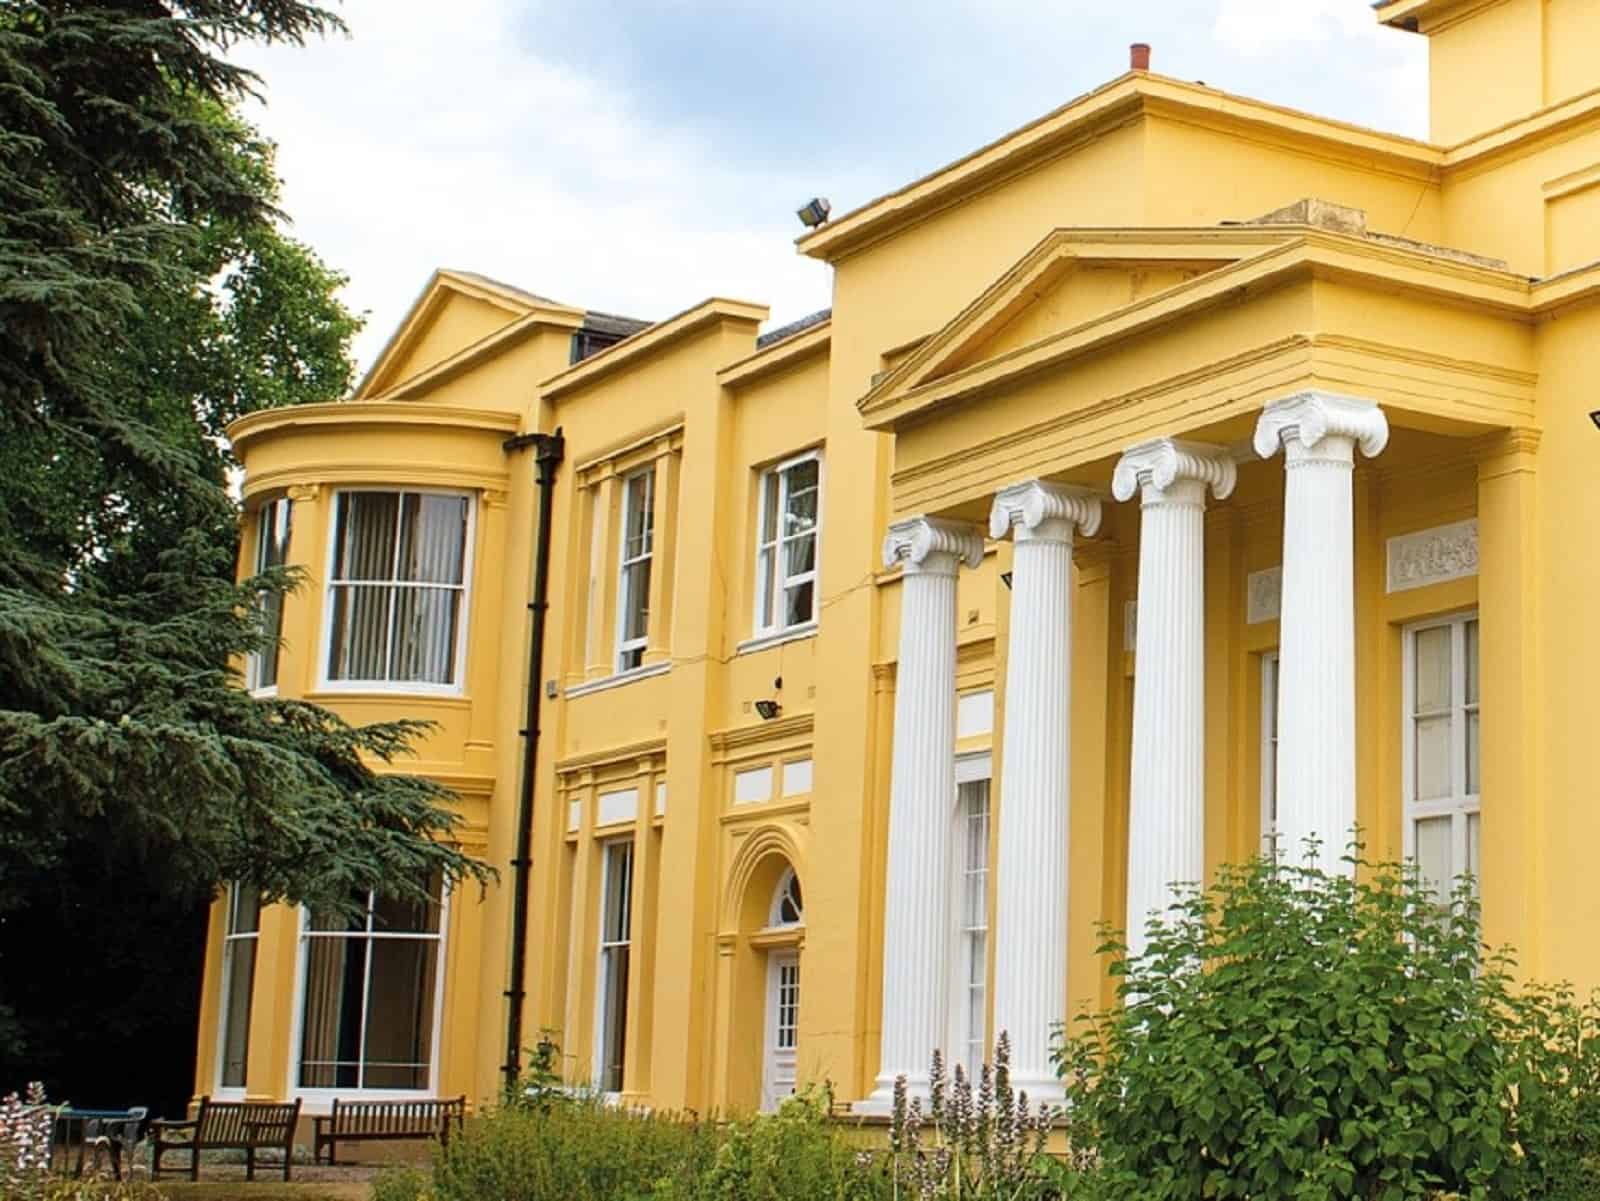 The British Horological Institute in Southwell in Nottinghamshire.